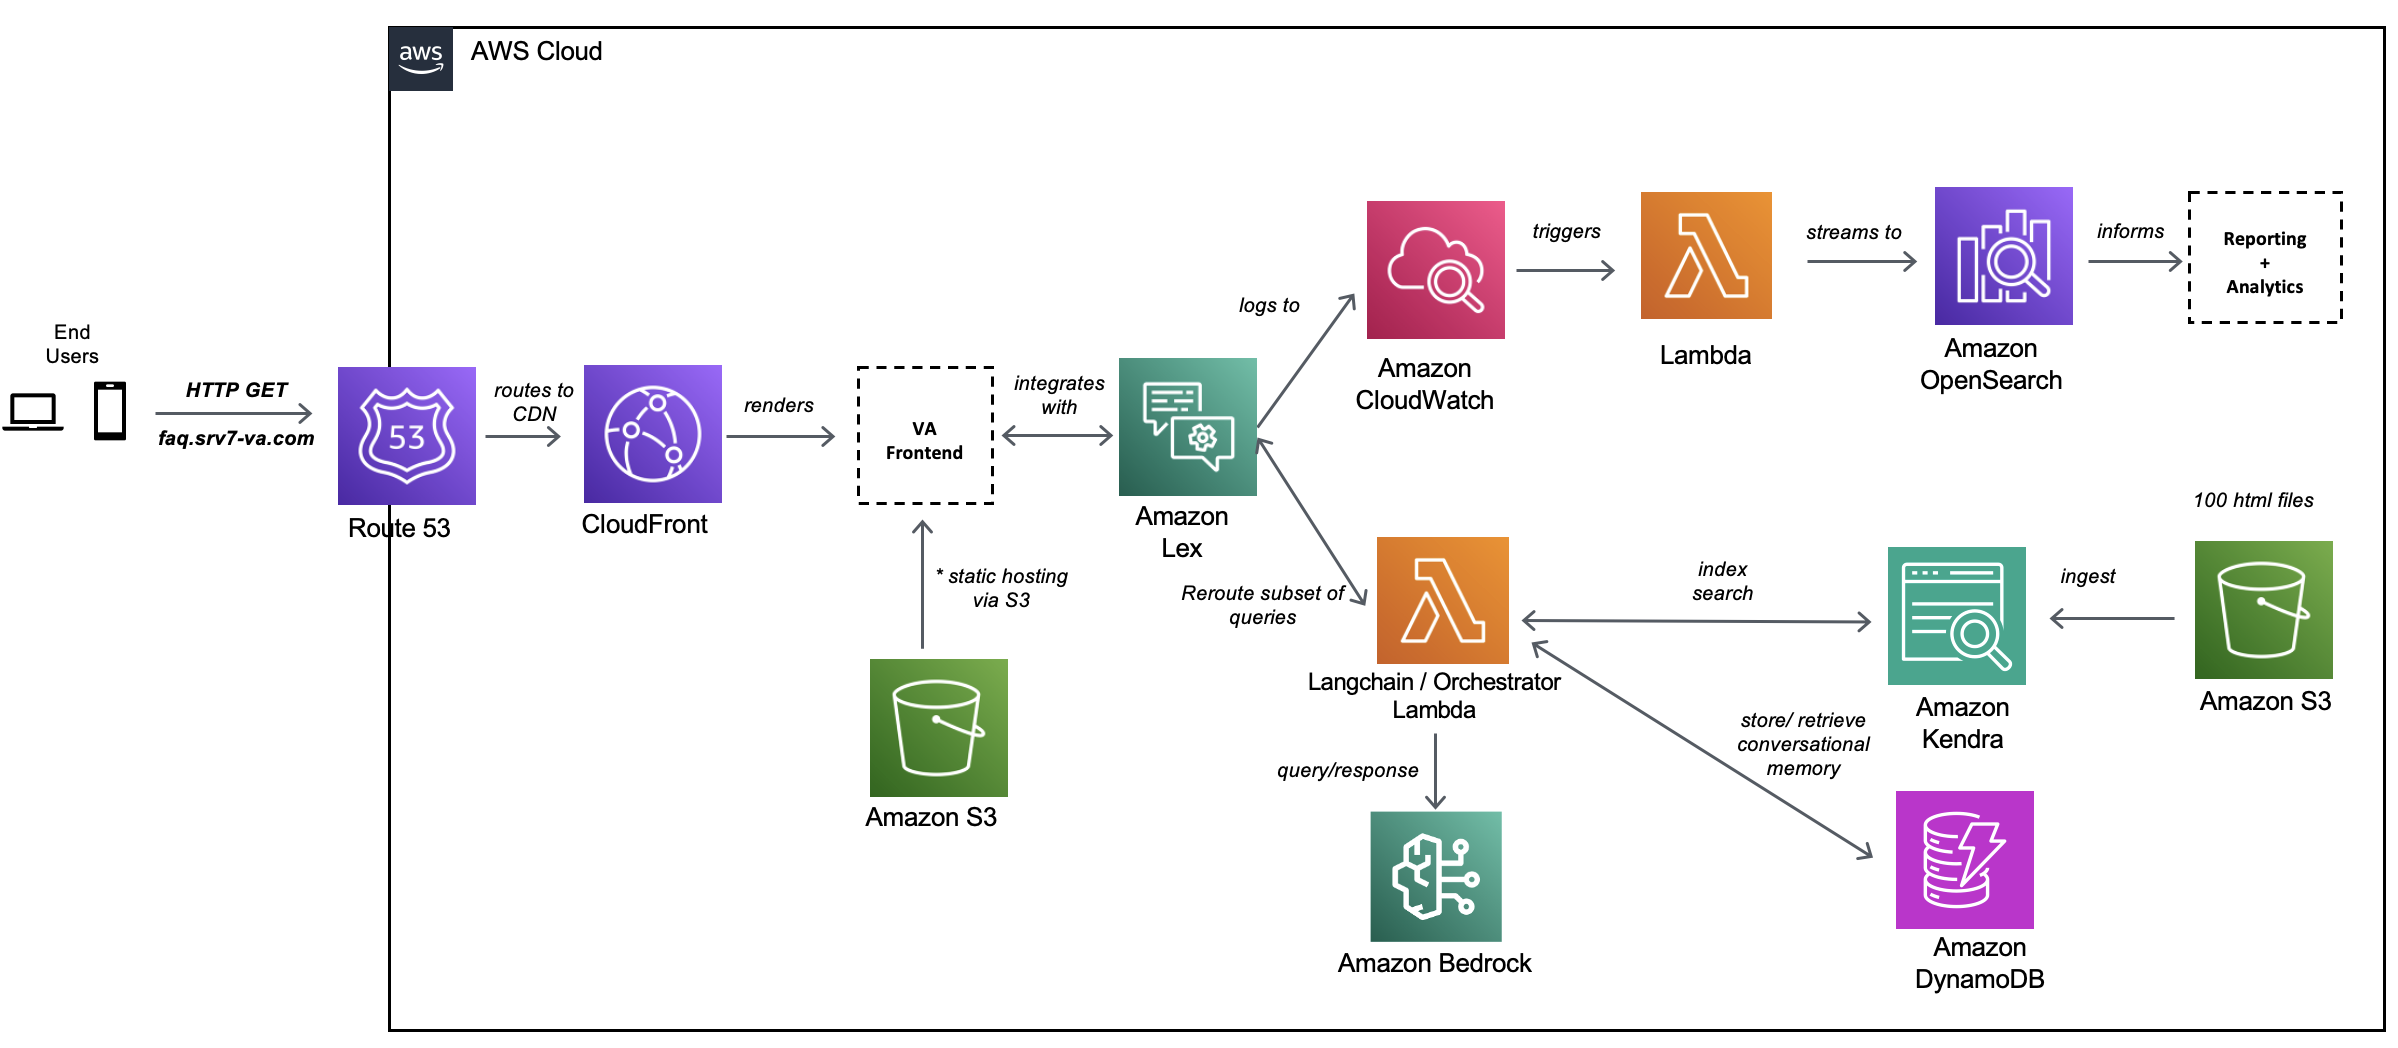 Accenture creates a Knowledge Assist solution using generative AI services on AWS | Amazon Web Services